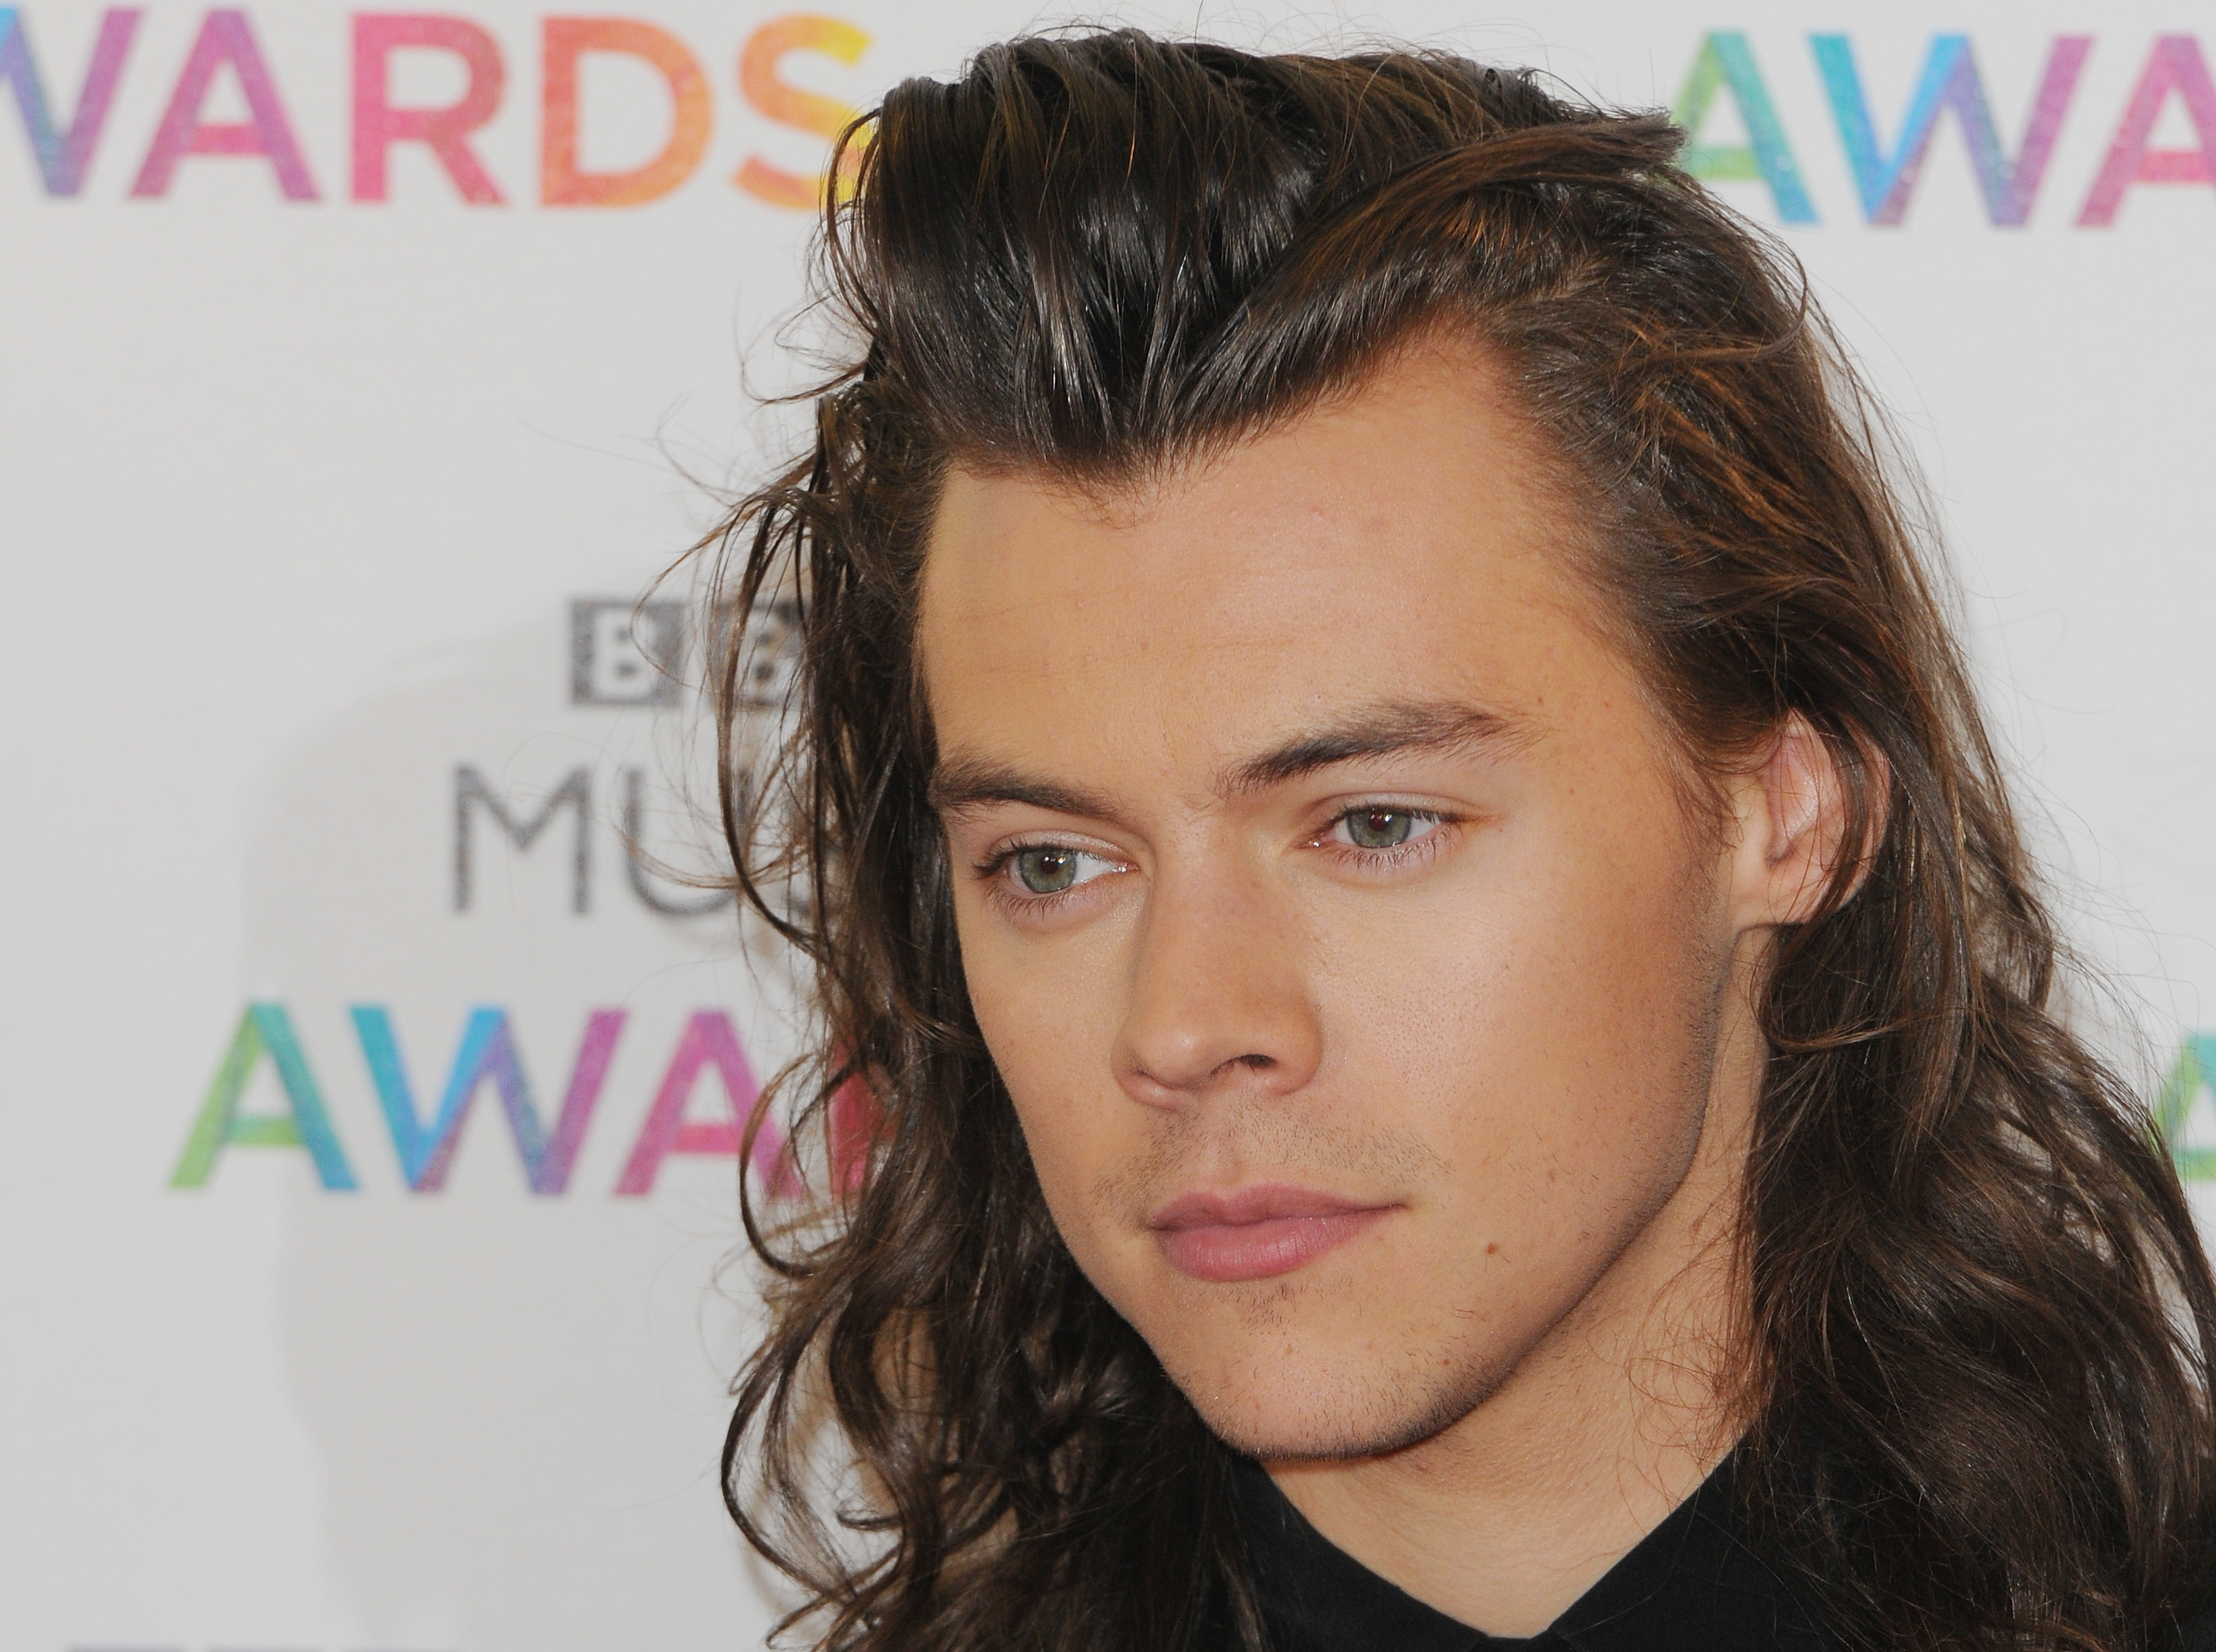 Fans Fall In Love With Harry Styles' New Haircut - Capital